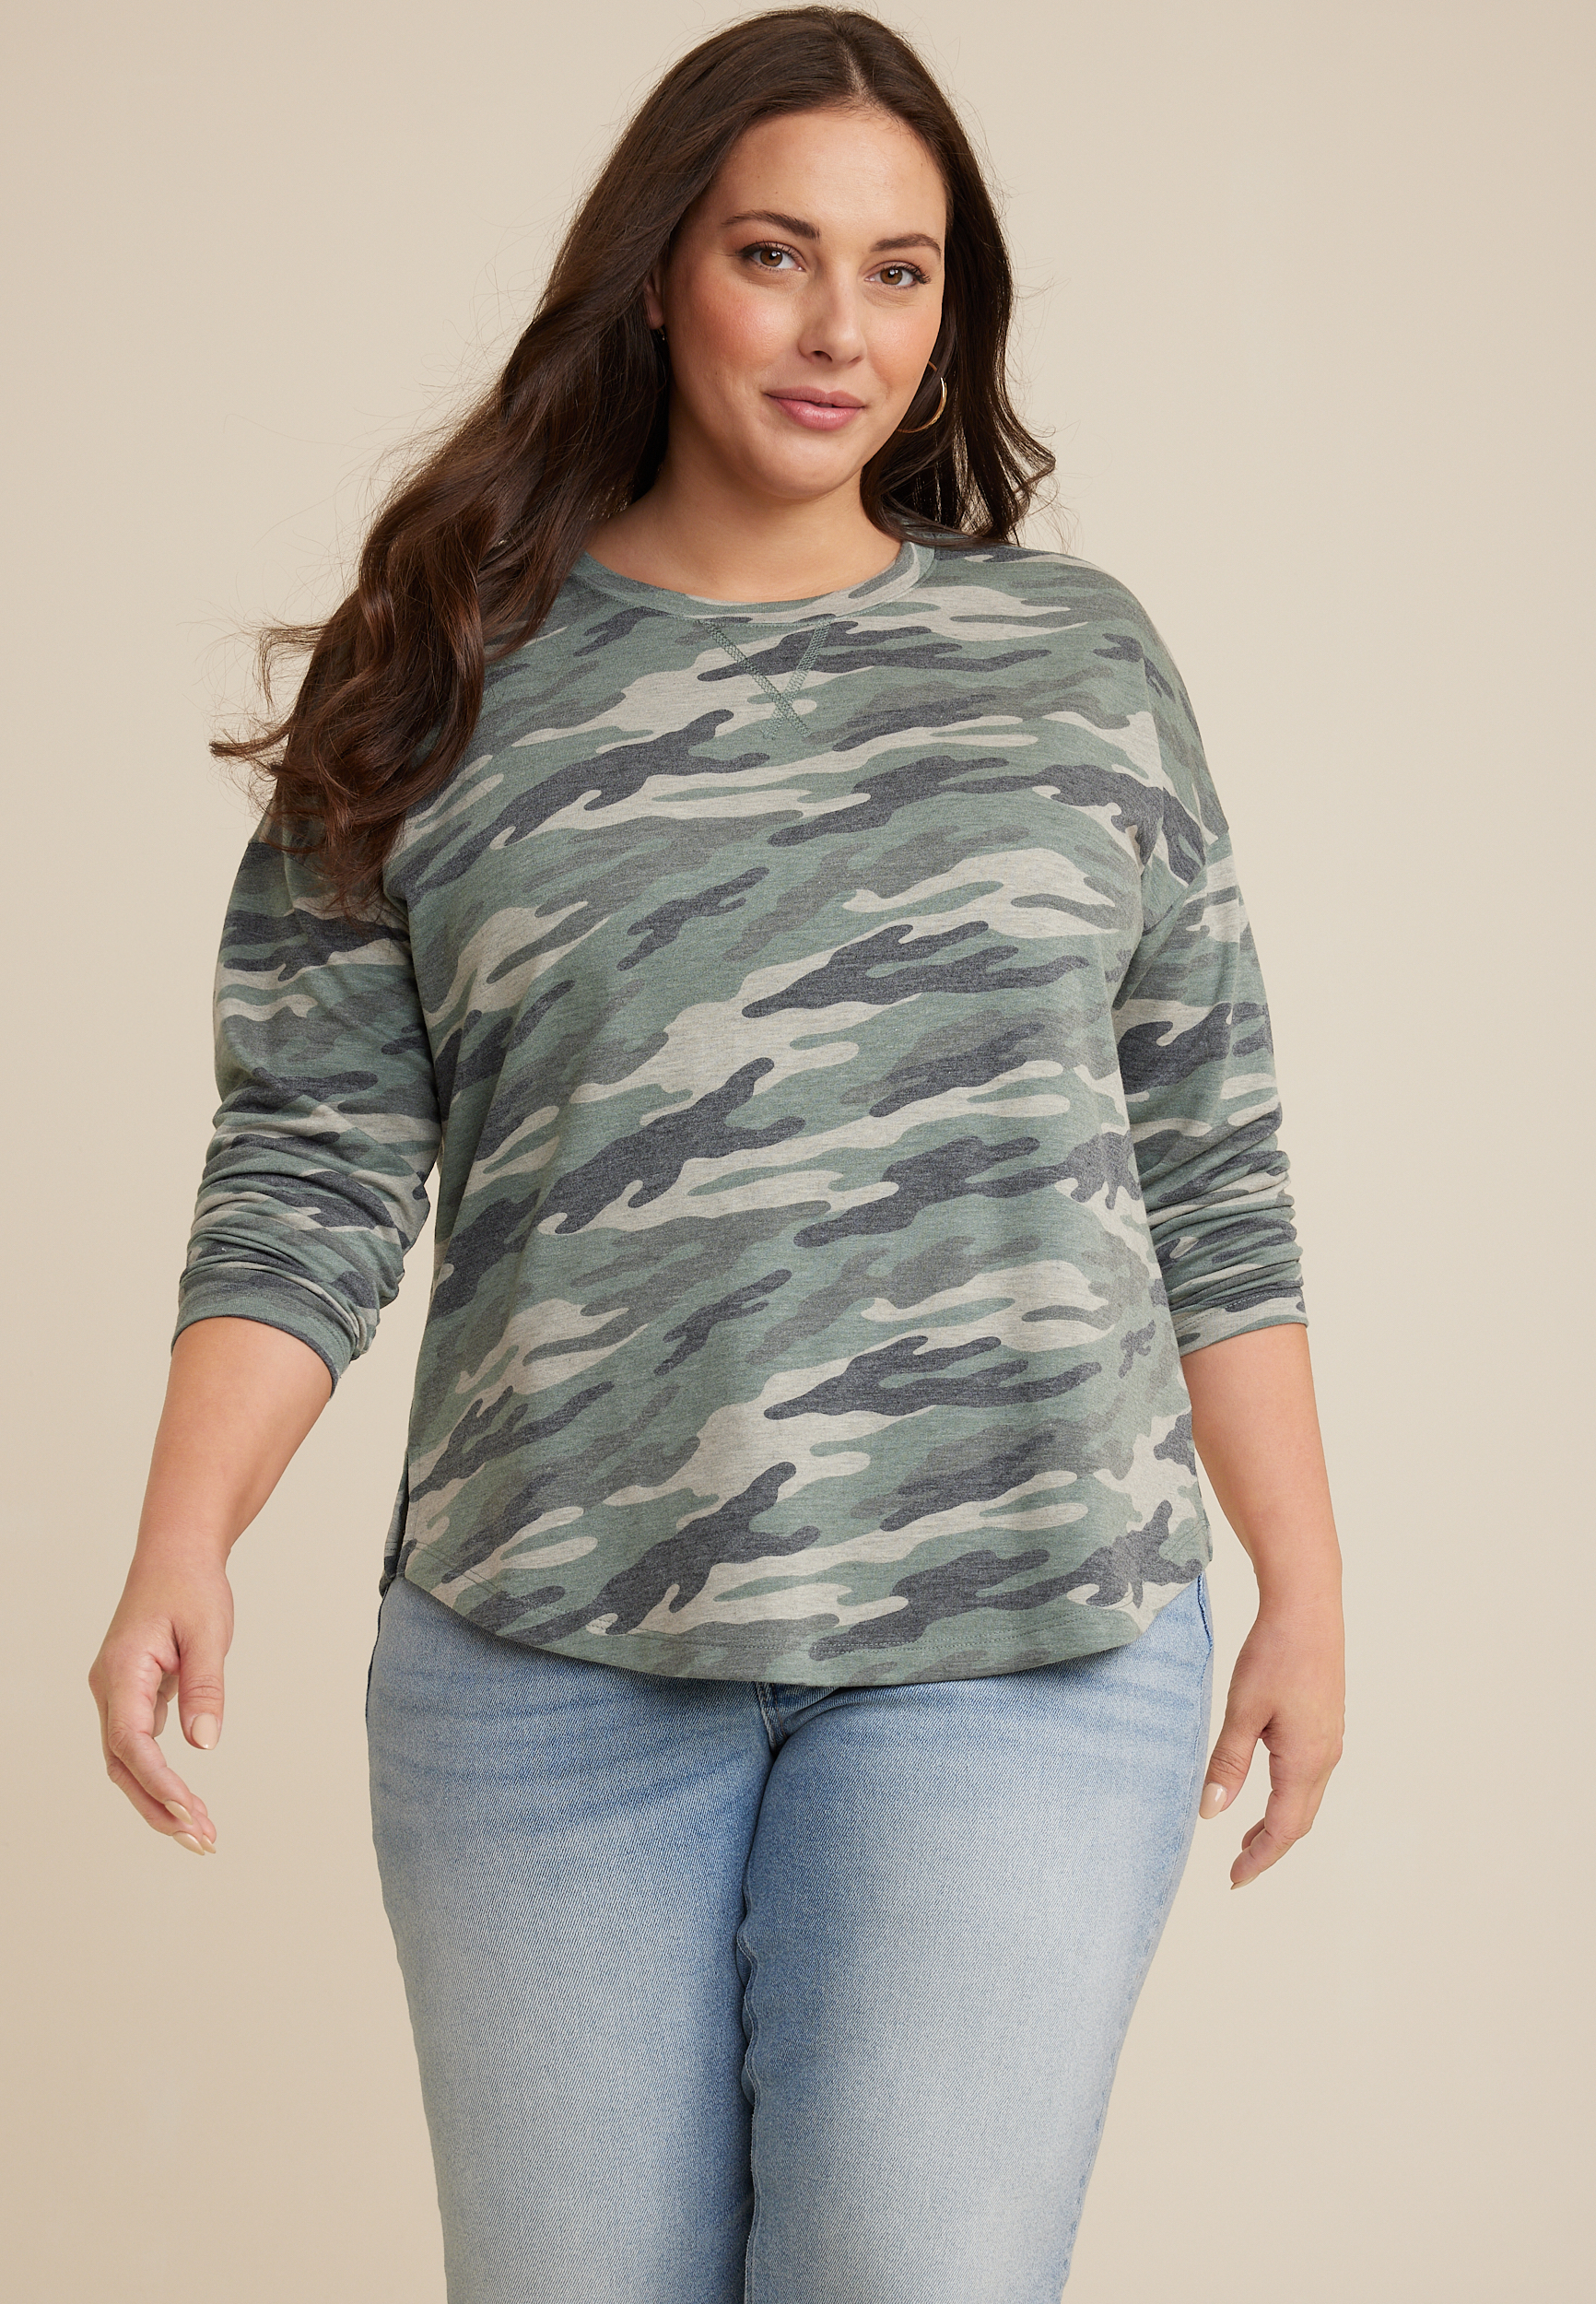 25% Off Styles For Plus Sizes